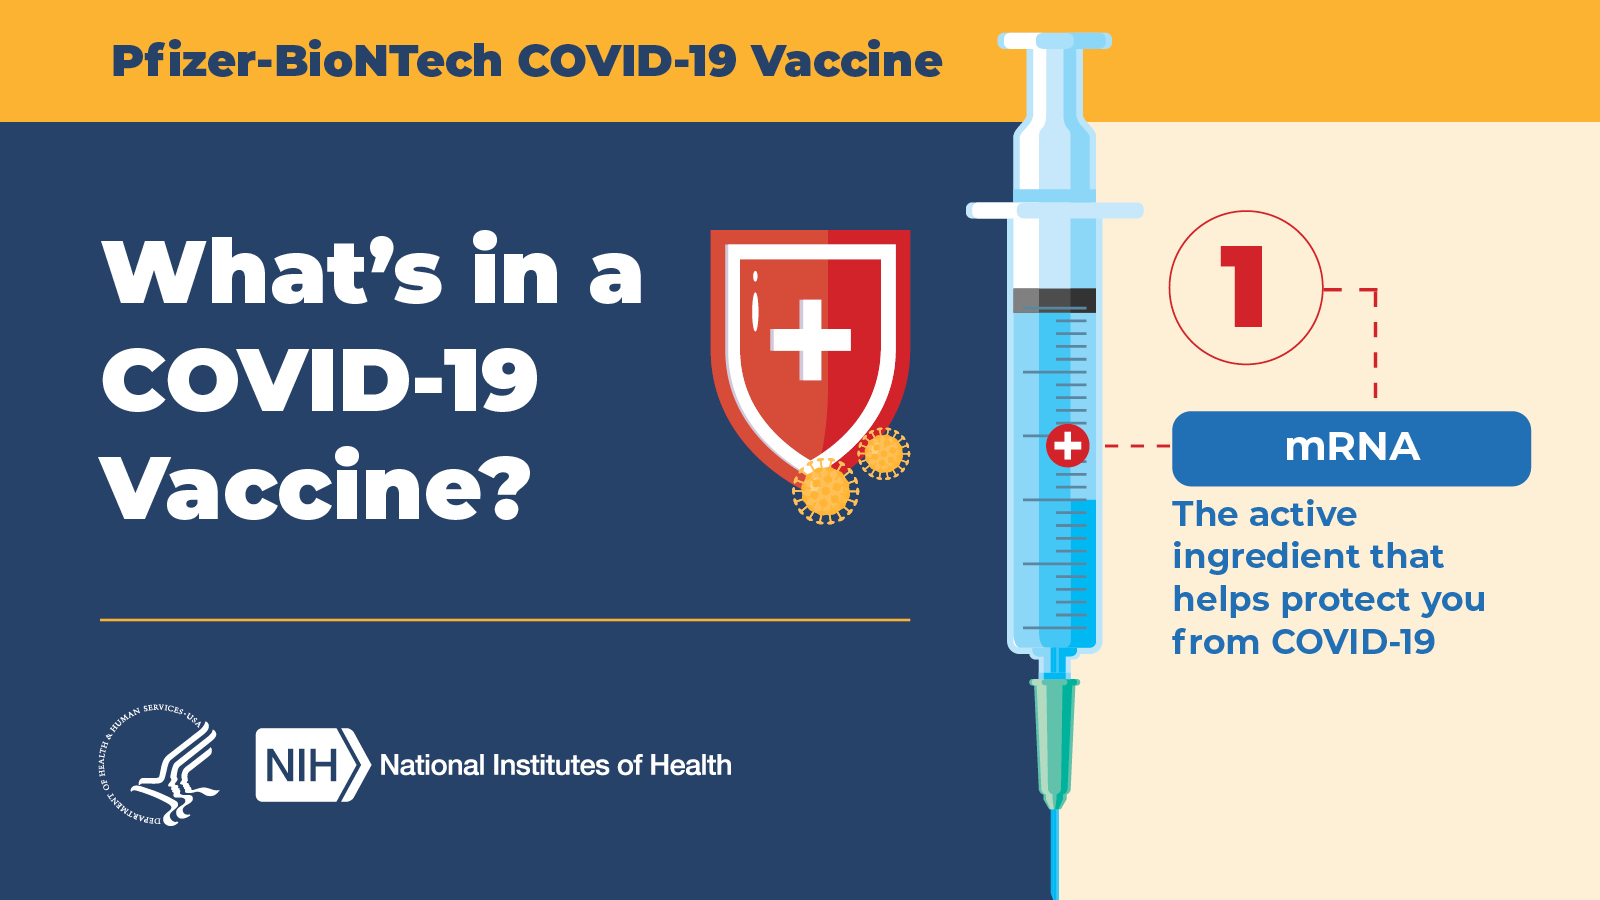 Pfizer-BioNTech COV ID-19 Vaccine  |  What's in a COVID-19 vaccine? 1: mRNA: The active ingredient that helps protect you from COVID-19